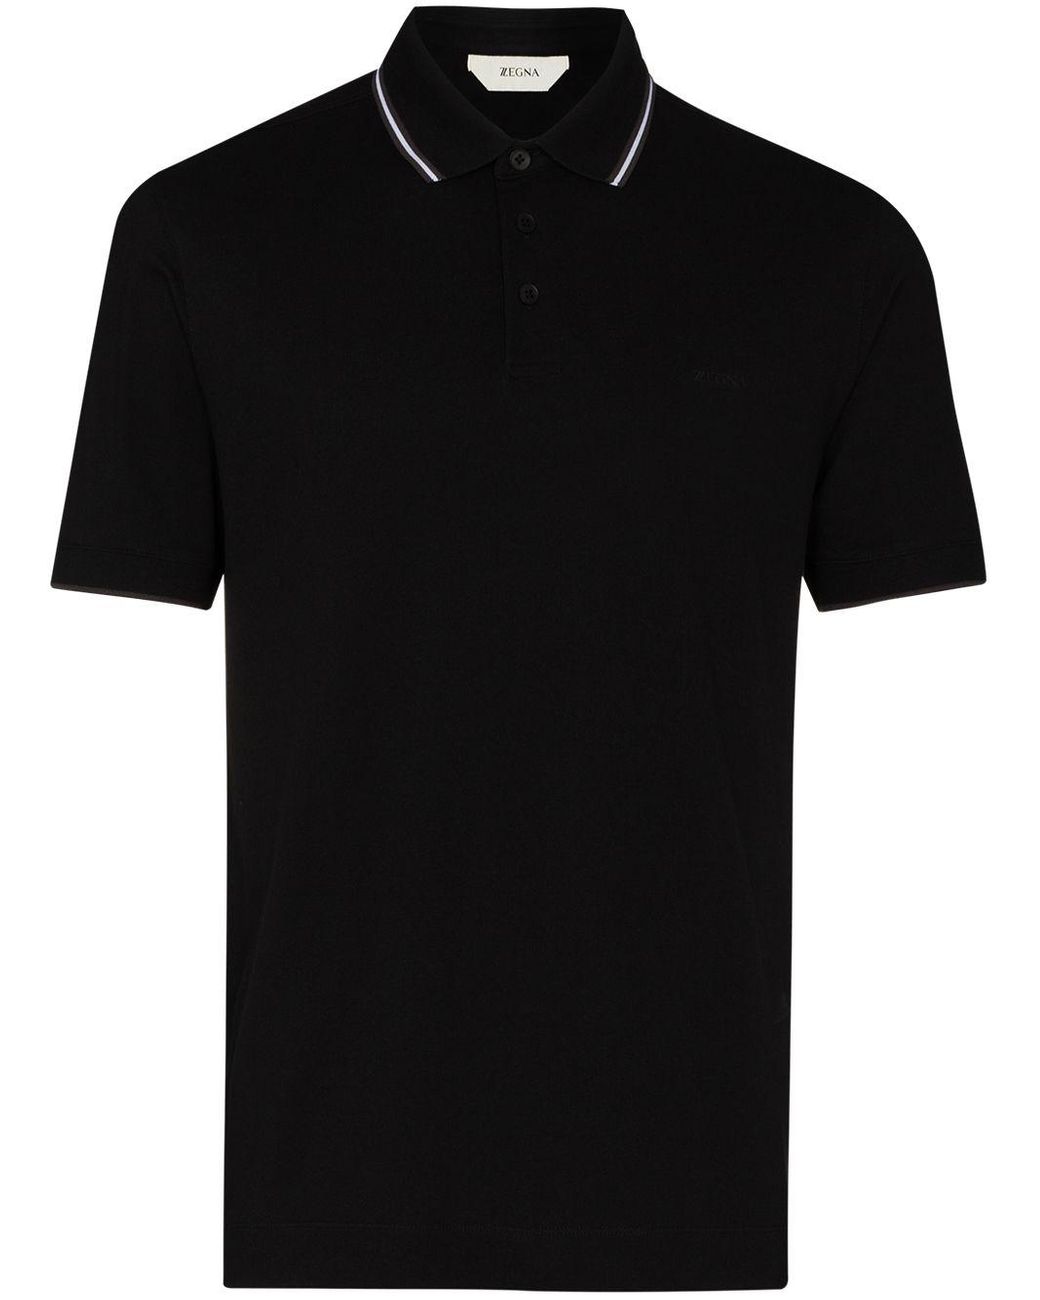 Z Zegna Synthetic Logo Polo T-shirt in Black for Men - Lyst